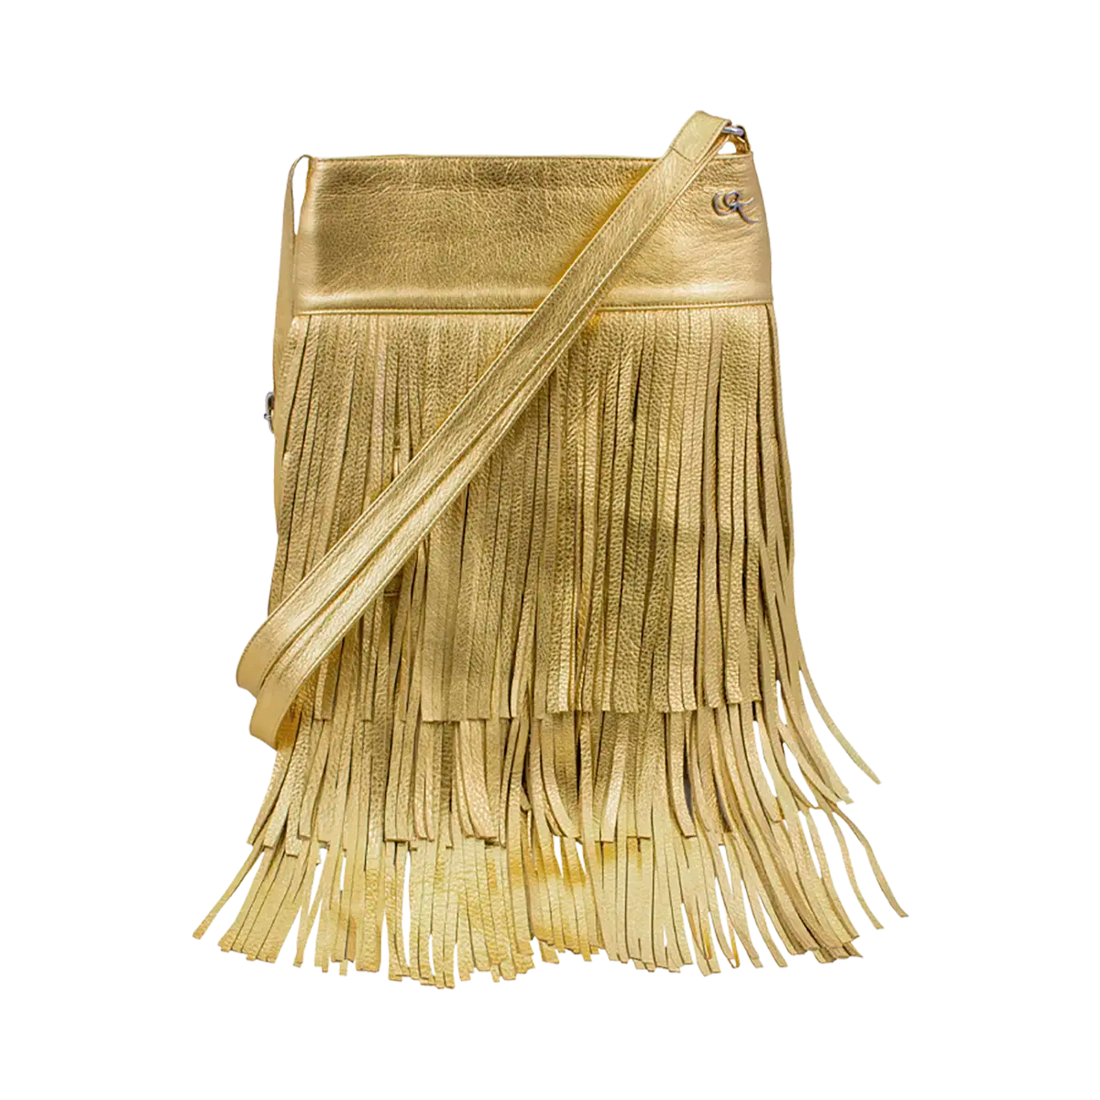 gold leather shoulder bag with 3 layers of fringe. Fashion accessories, for women in San Diego, CA.